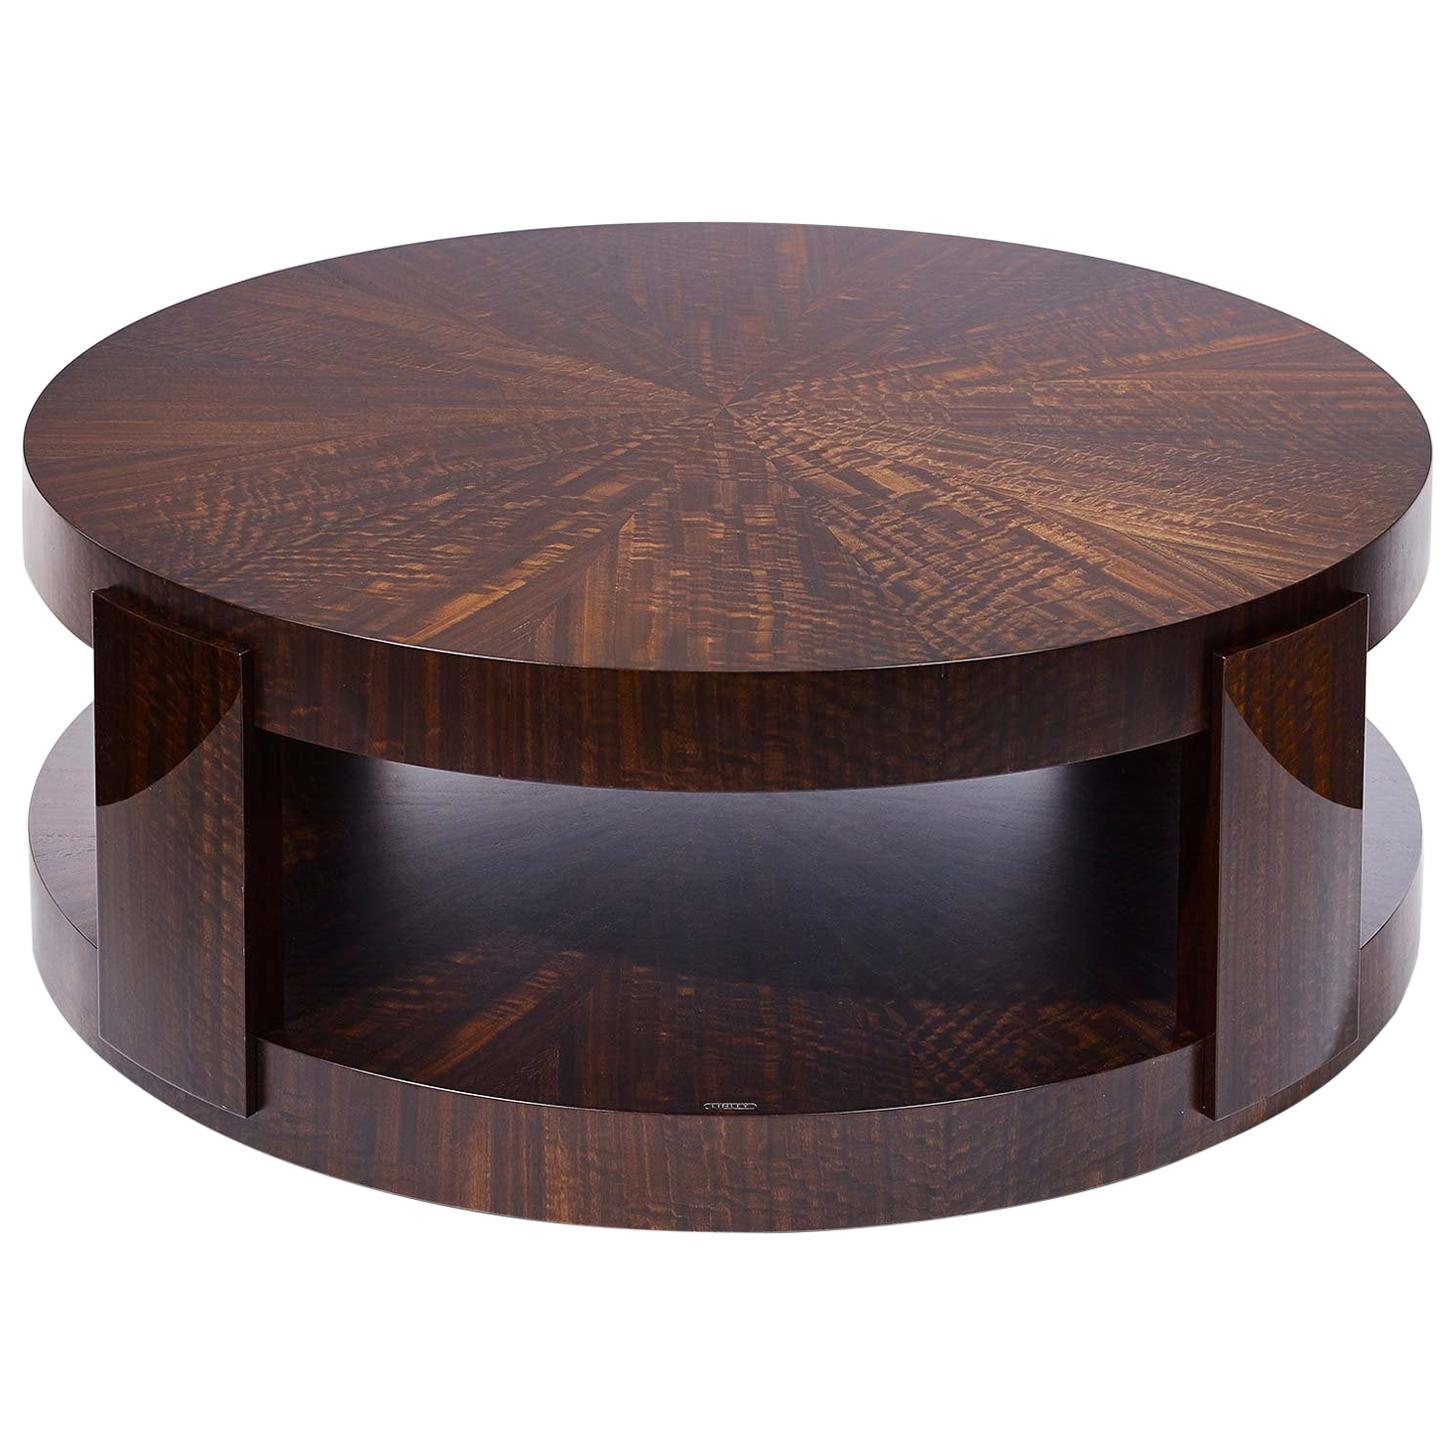 LINLEY Metro Coffee Table For Sale